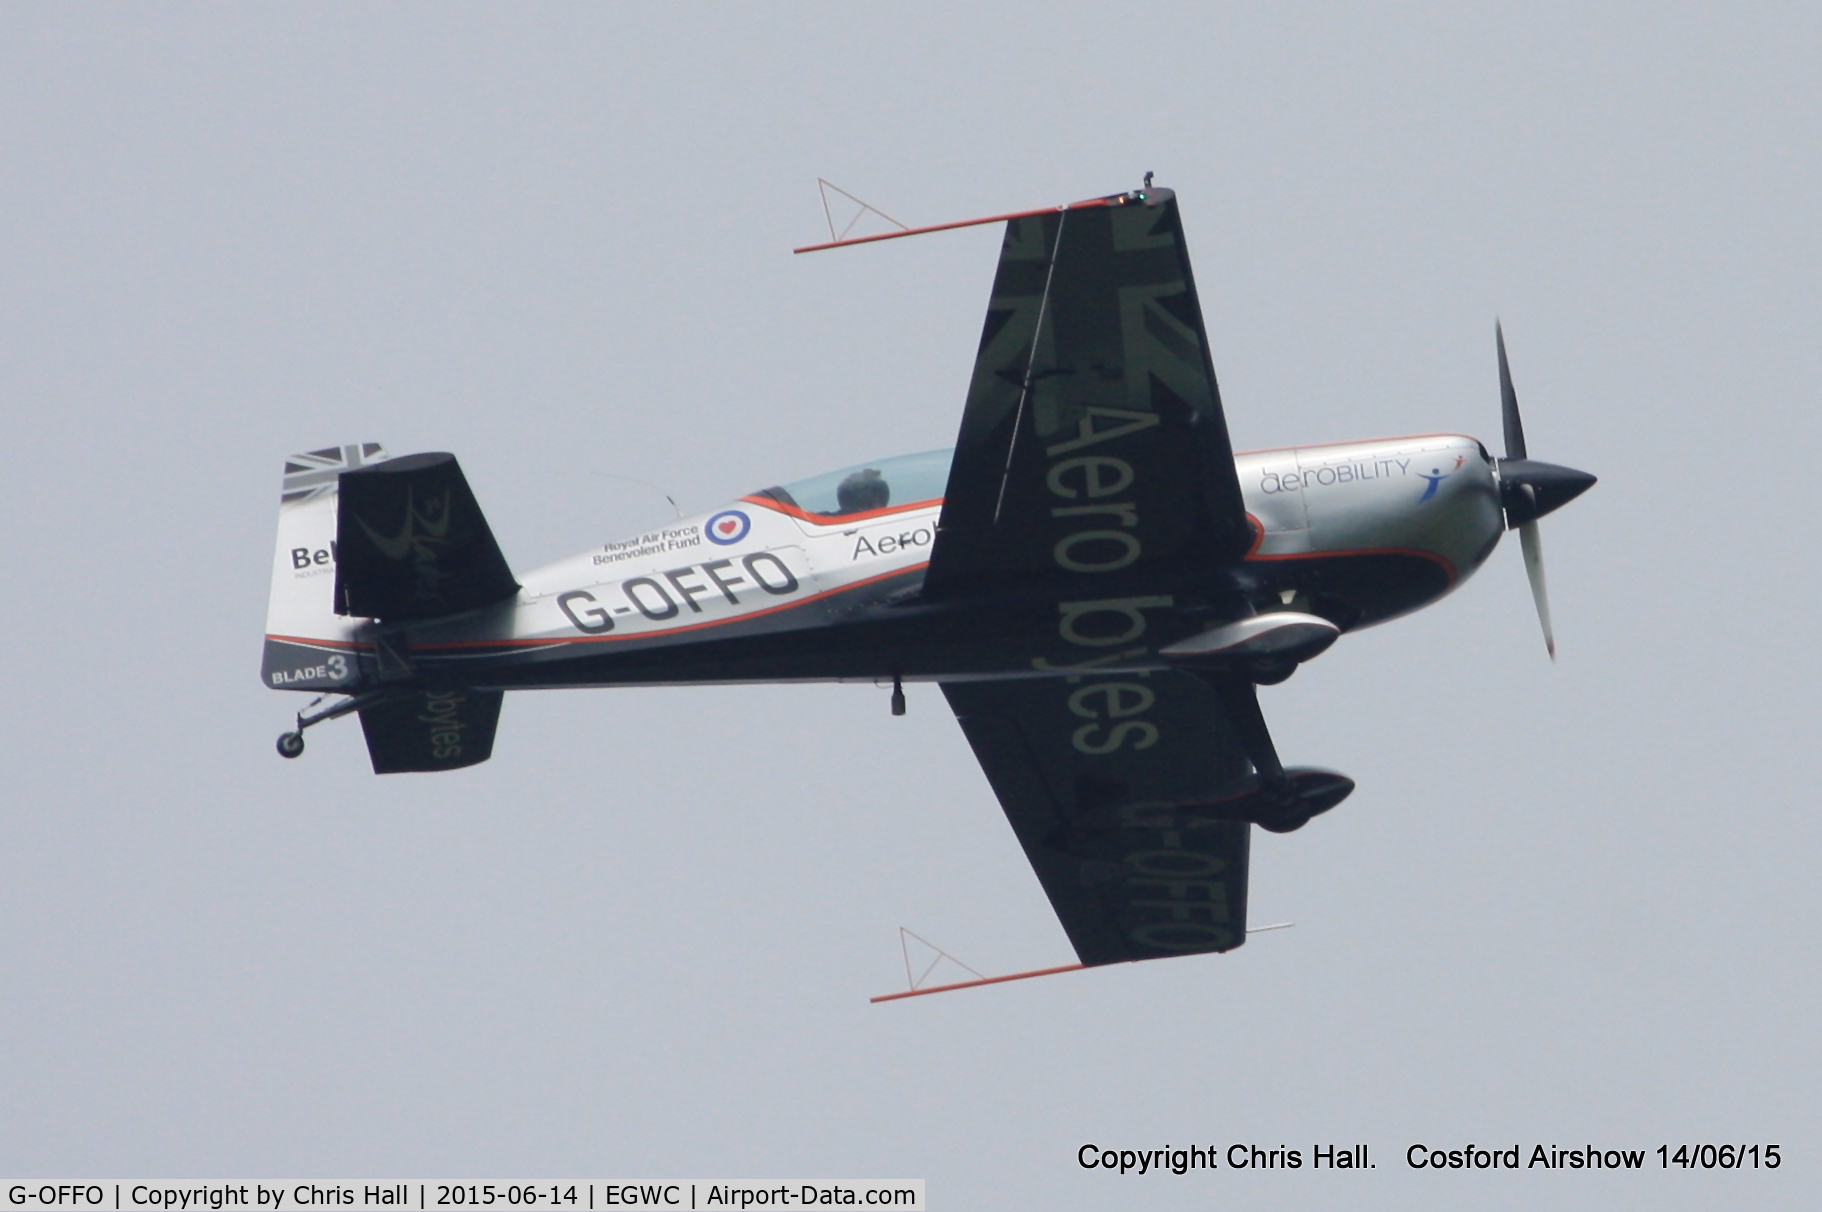 G-OFFO, 2006 Extra EA-300/L C/N 1226, displaying at the 2015 Cosford Airshow